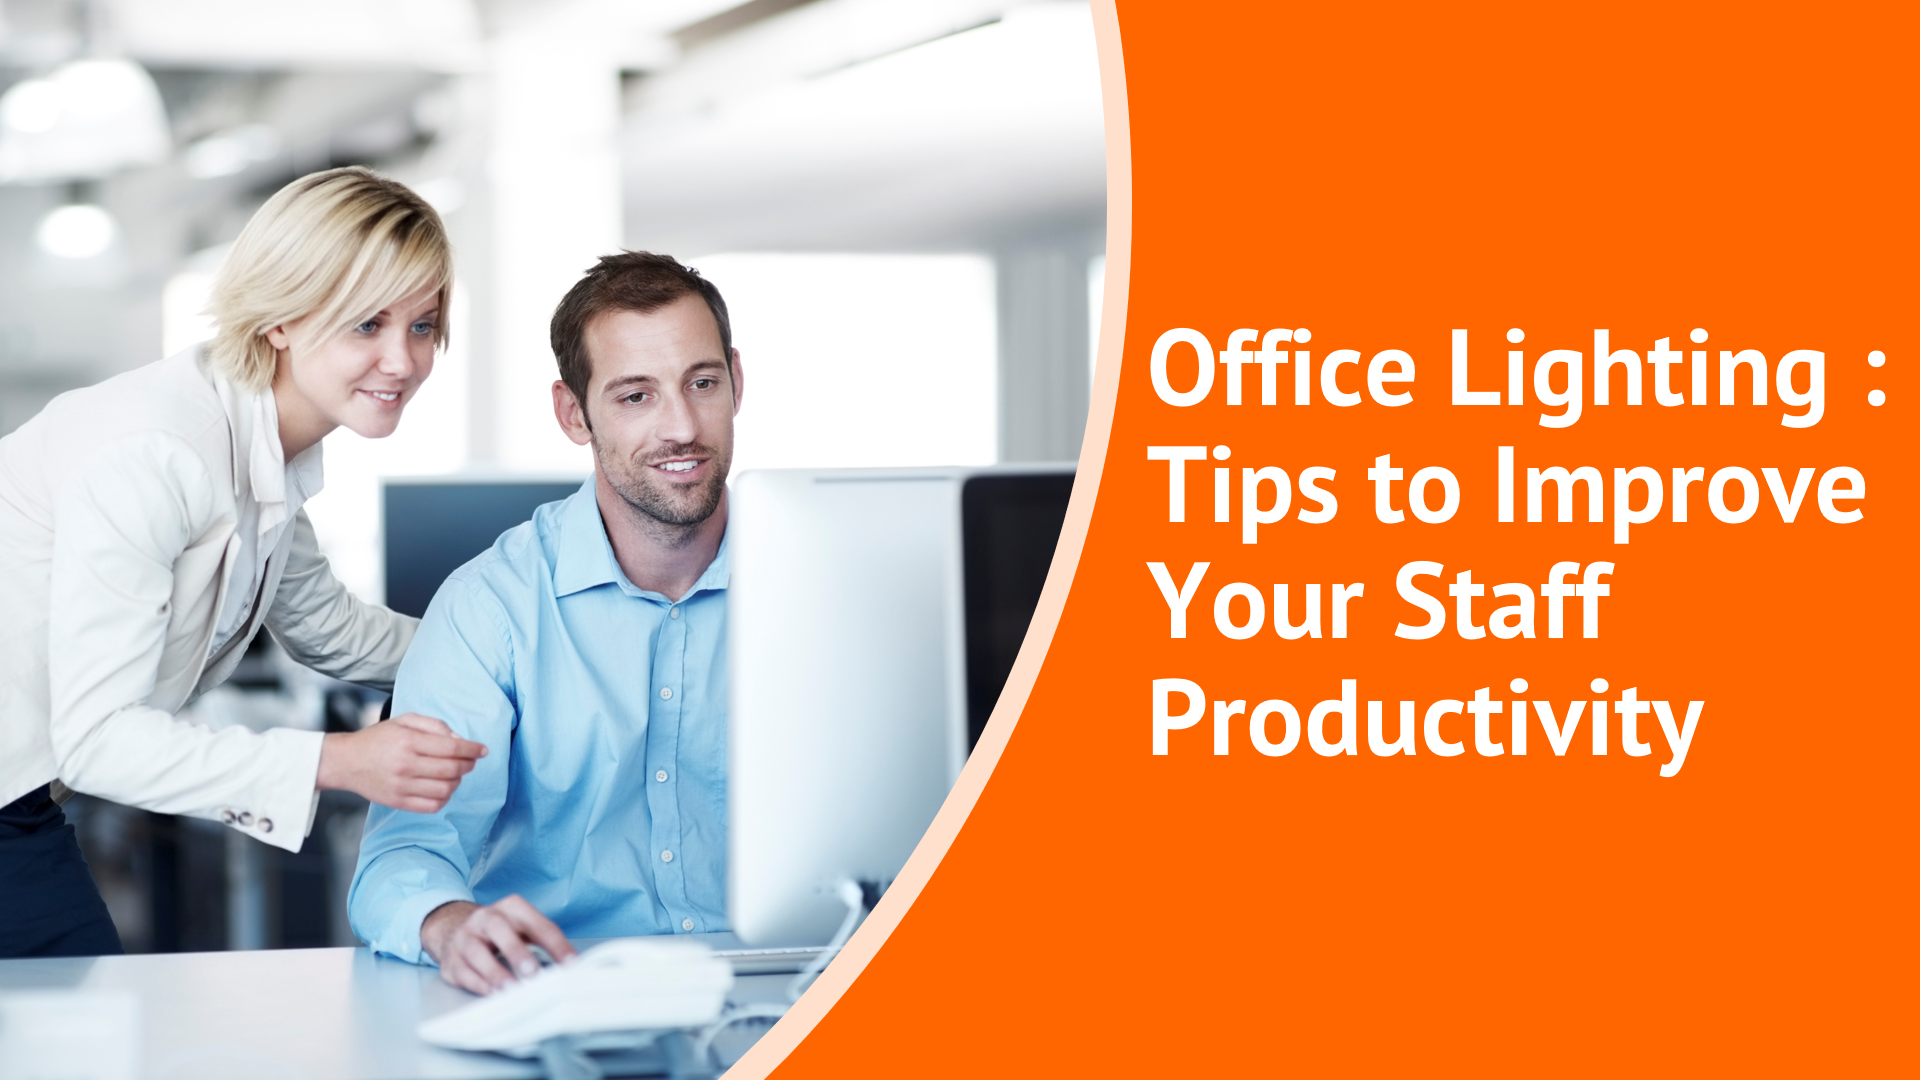 Office lighting - Tips to Improve Your Staff Productivity